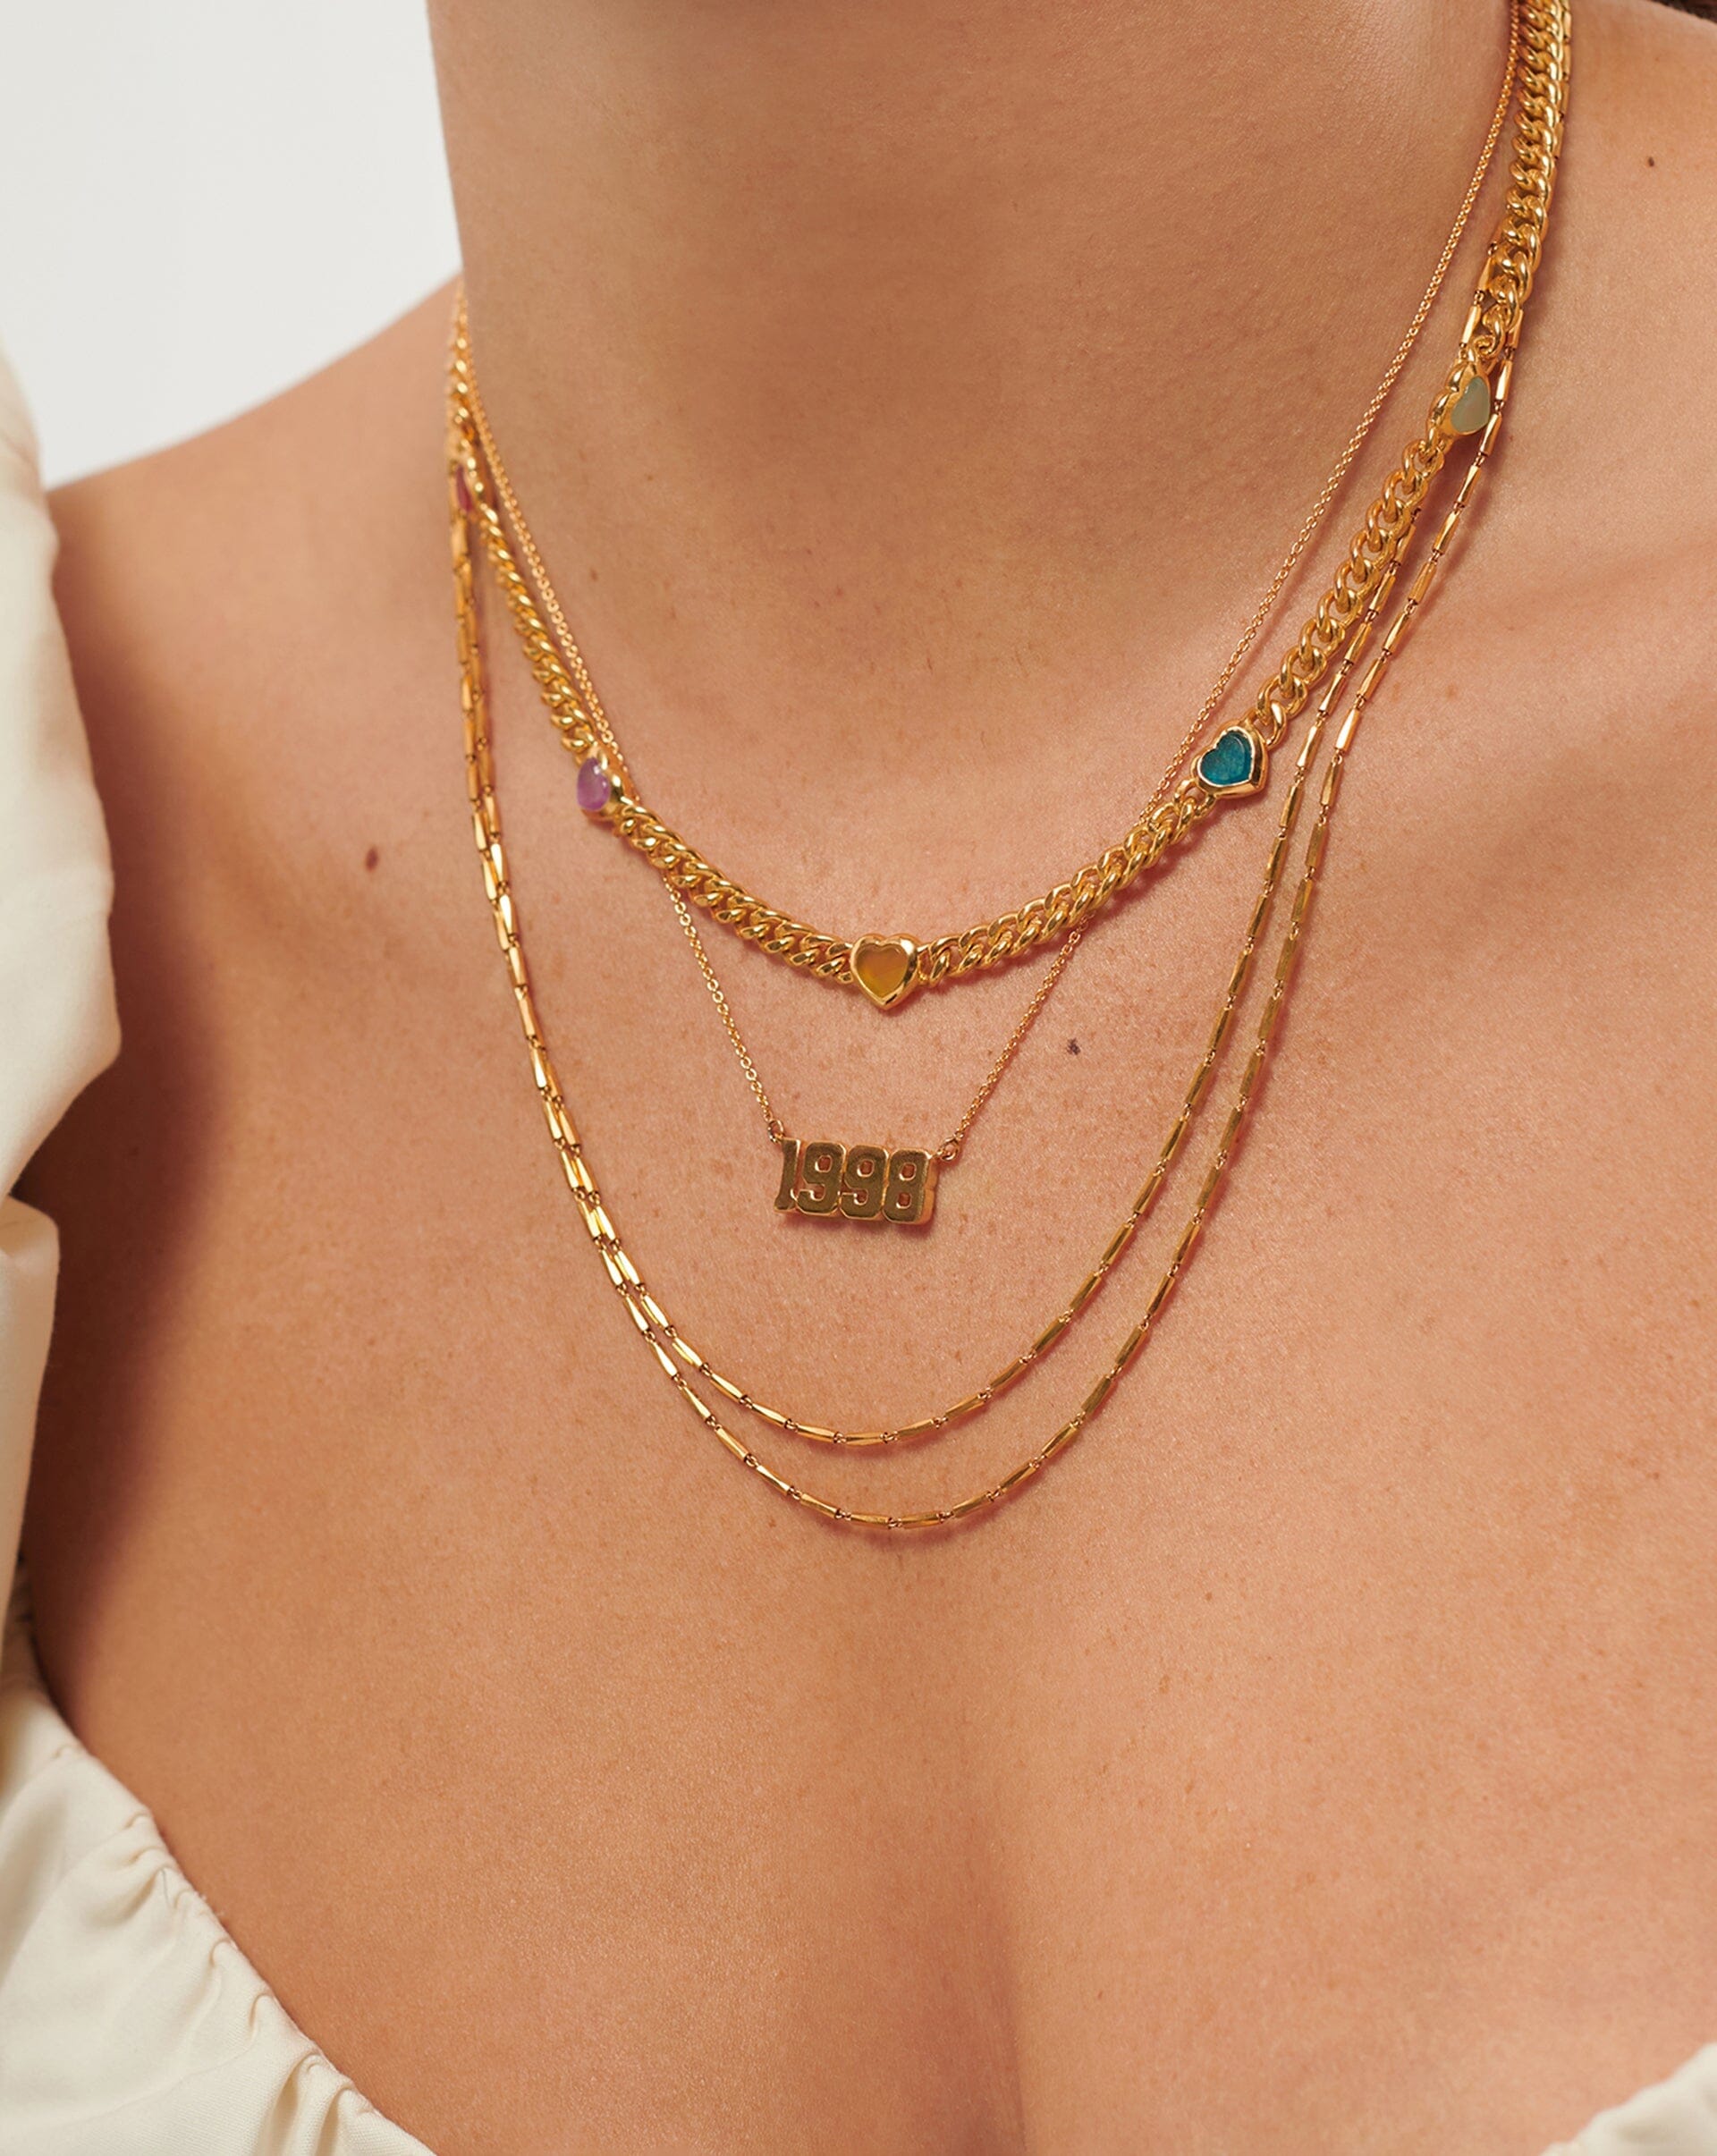 Birth Year Necklace - Year 1998 | 18ct Gold Plated Vermeil Necklaces Missoma 